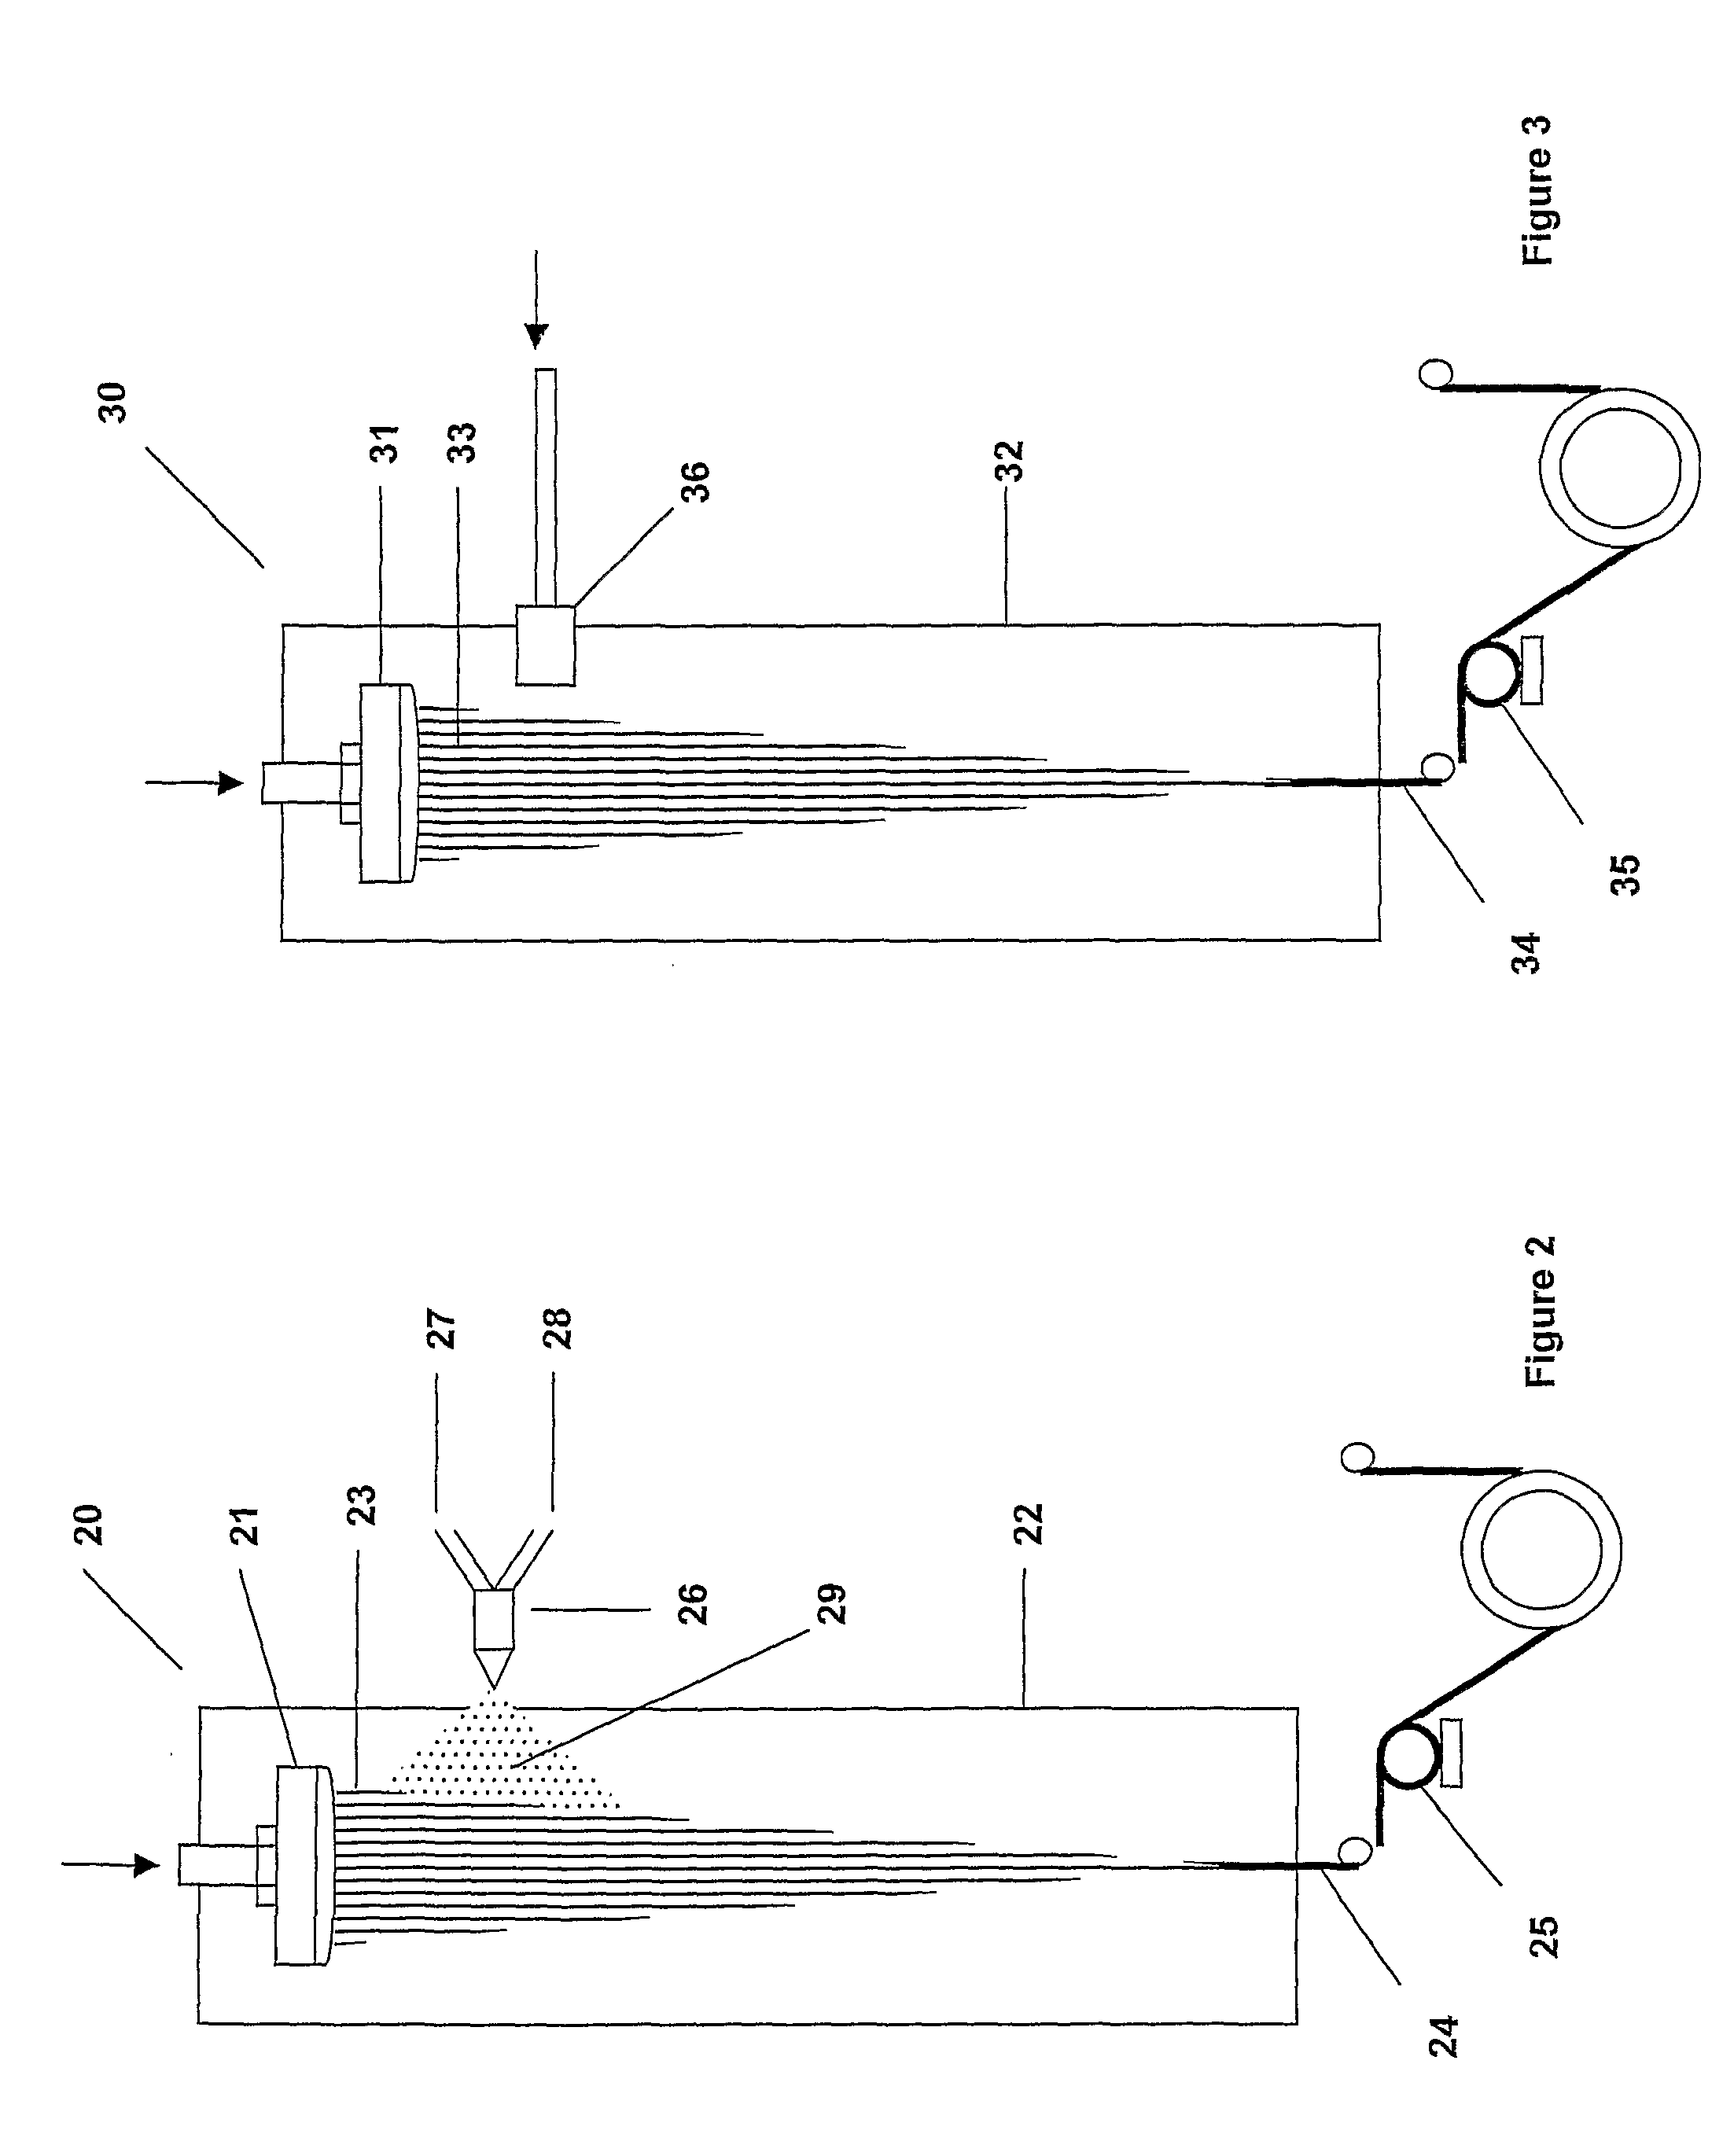 Process for making filter tow